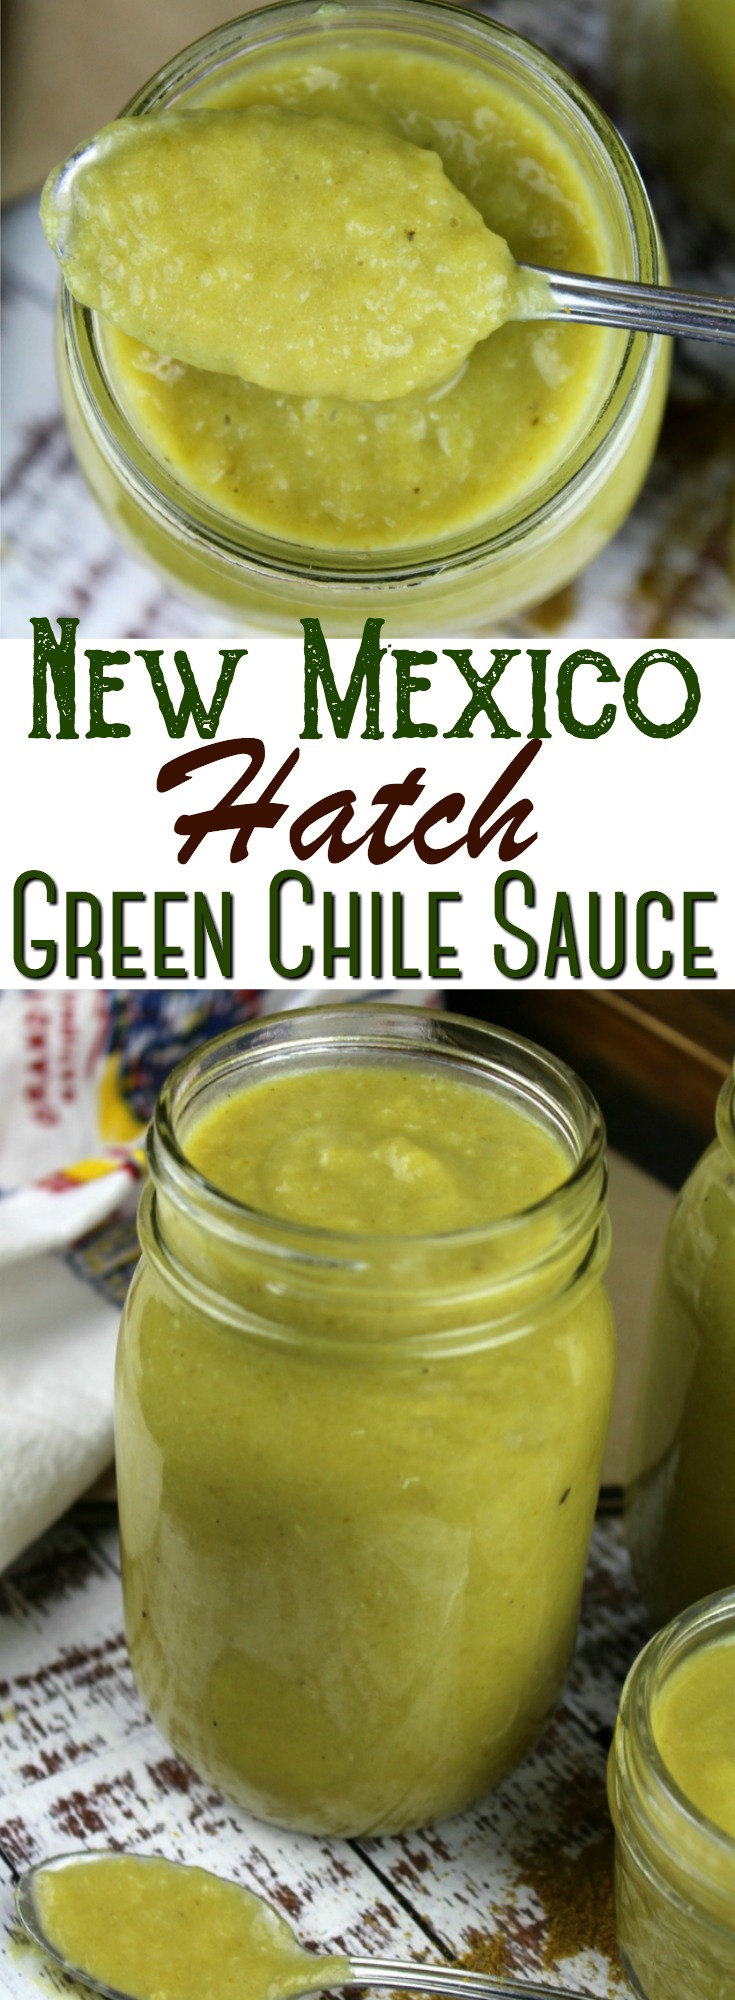 Bring a taste of New Mexico to your table with this traditional Hatch green chile sauce! It's incredible on burritos and enchiladas, smothered on eggs or over meat and potatoes at lunch or dinner. #Hatchchile #NewMexico #greenchile #enchiladasauce 